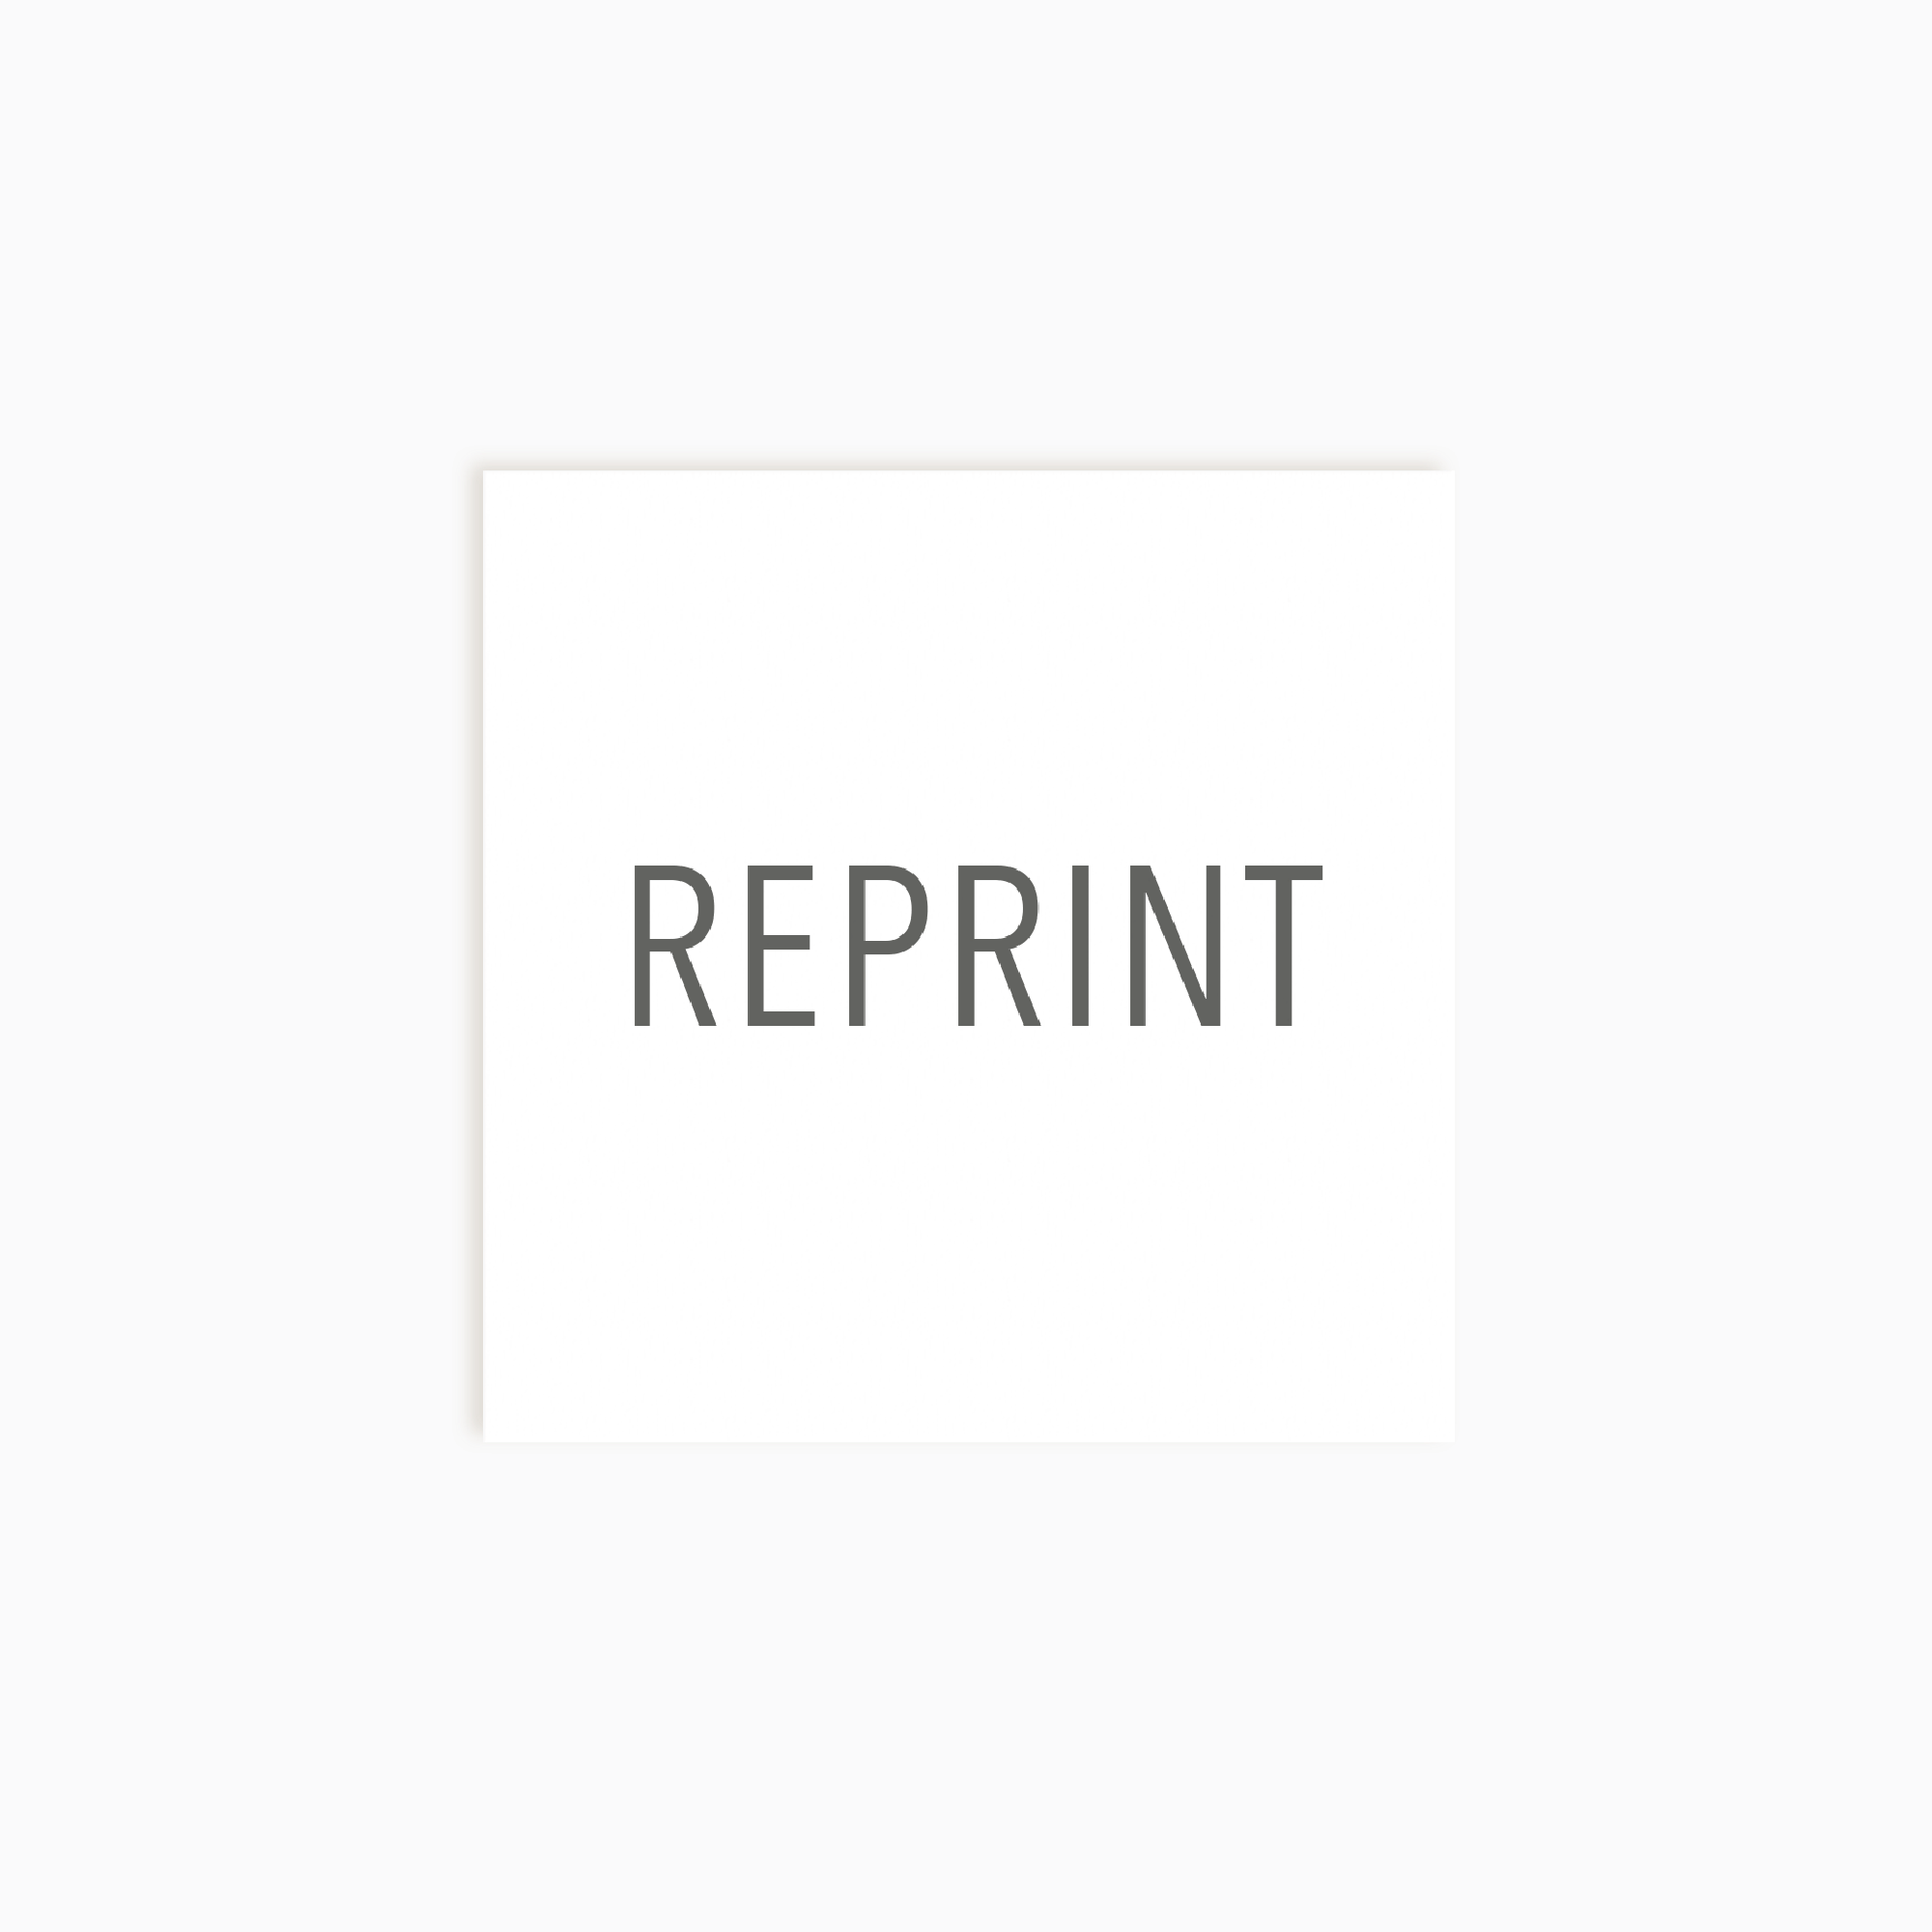 Reprint Your Square Product Label